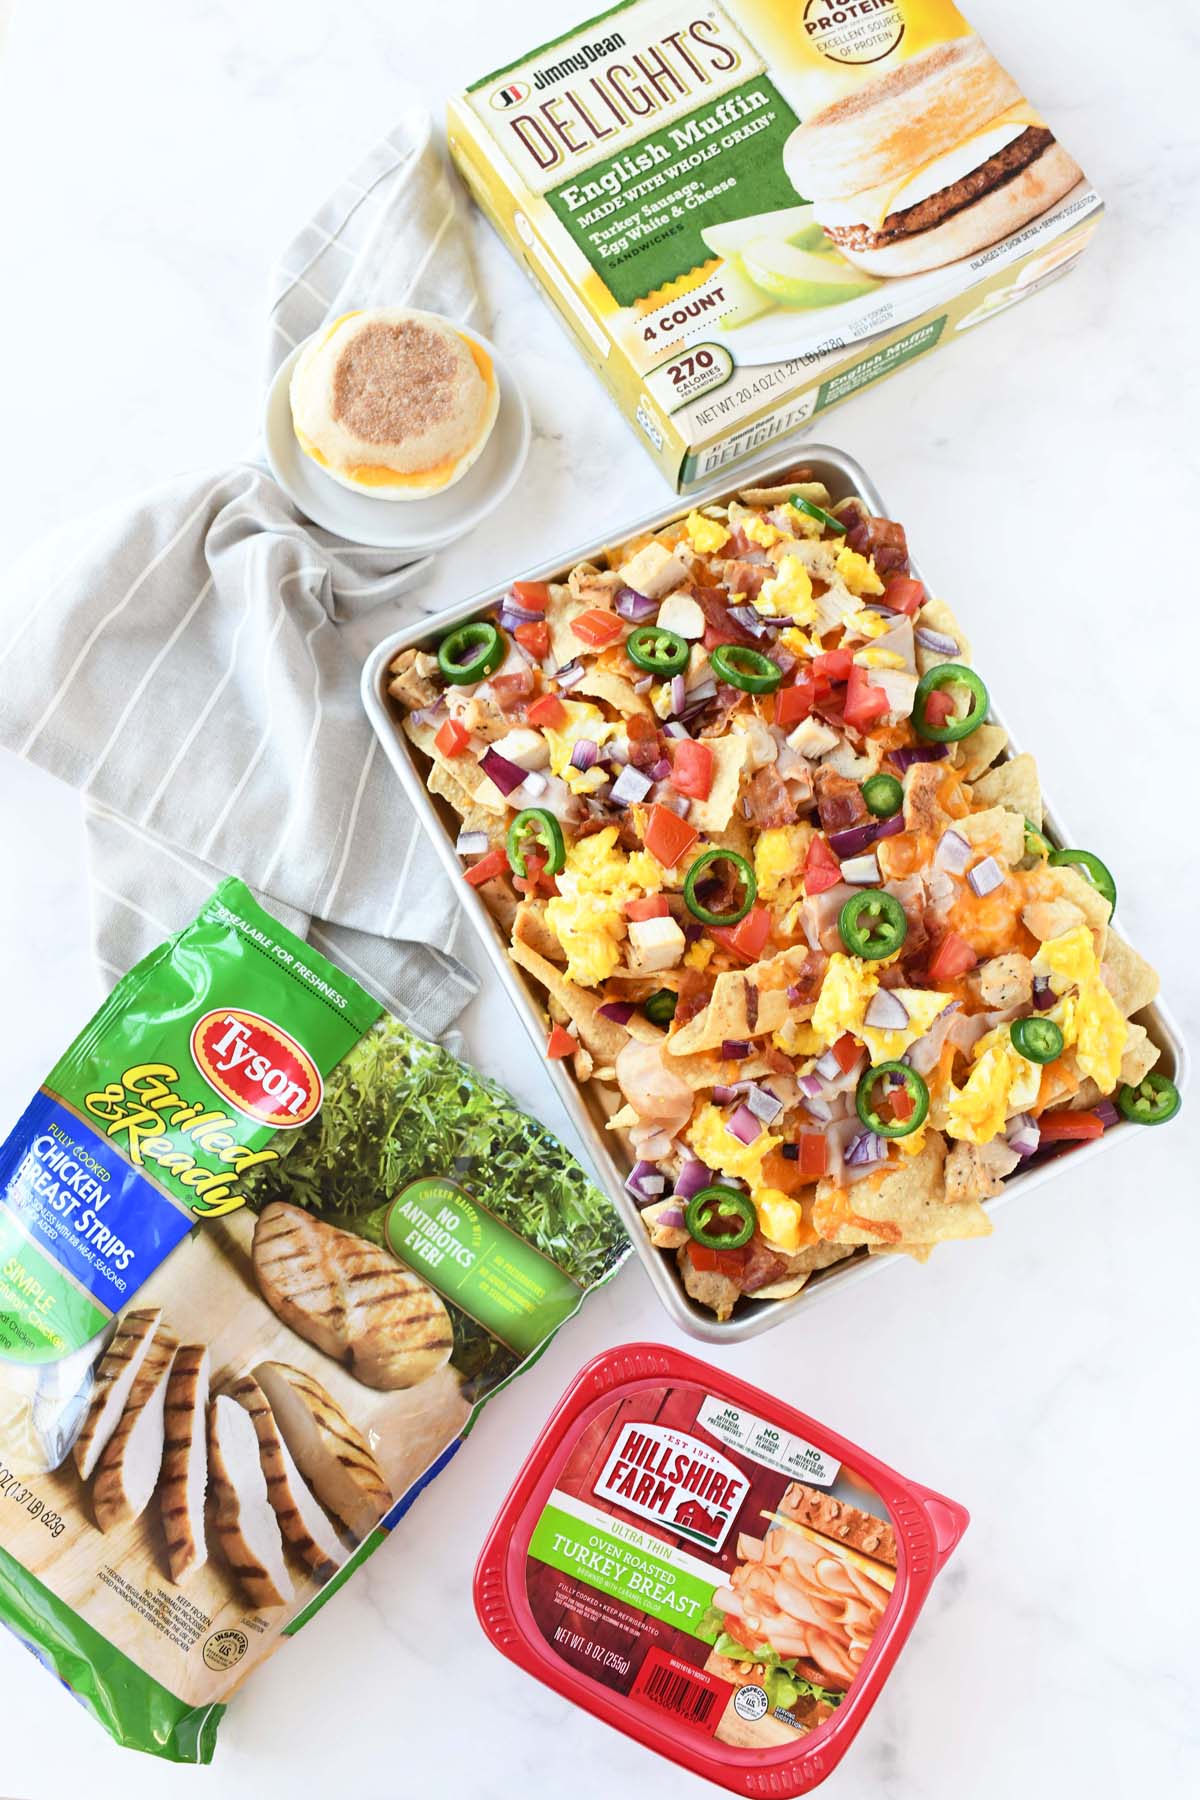 Breakfast Nachos and sandwich with Tyson and Hillshire Farms packaging on a white table.